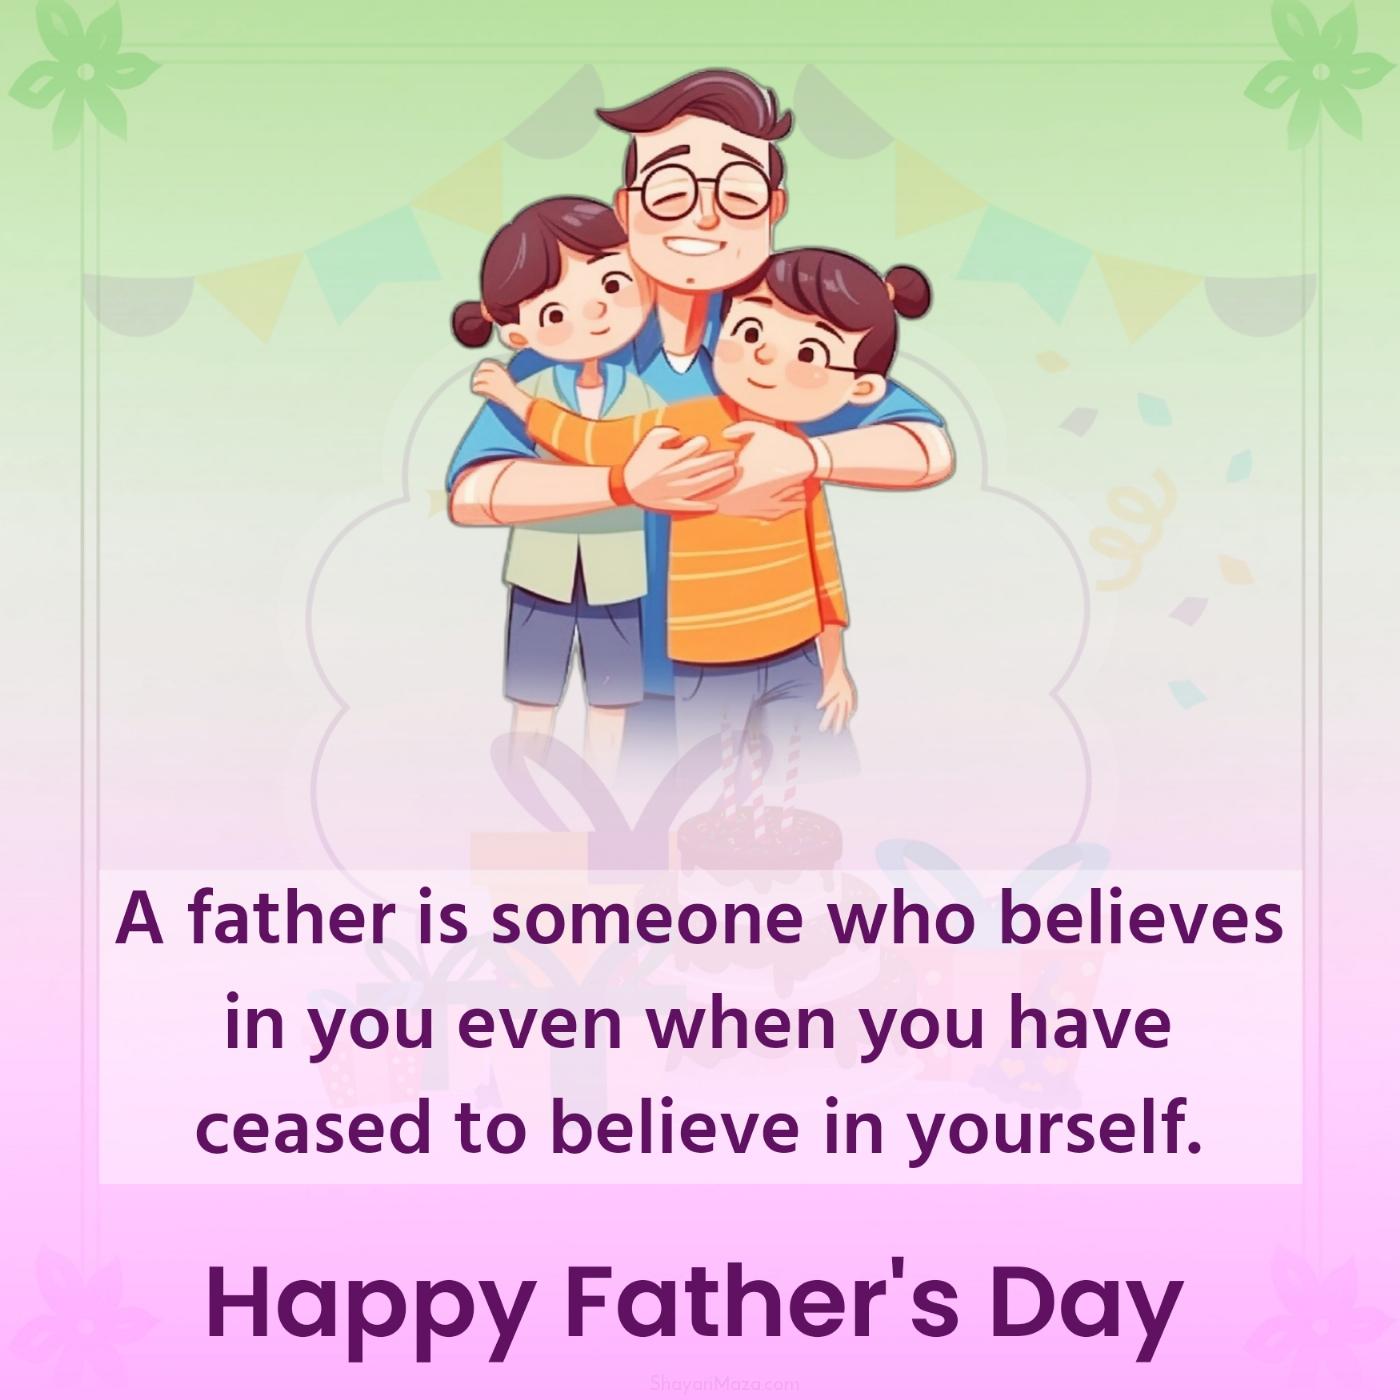 A father is someone who believes in you even when you